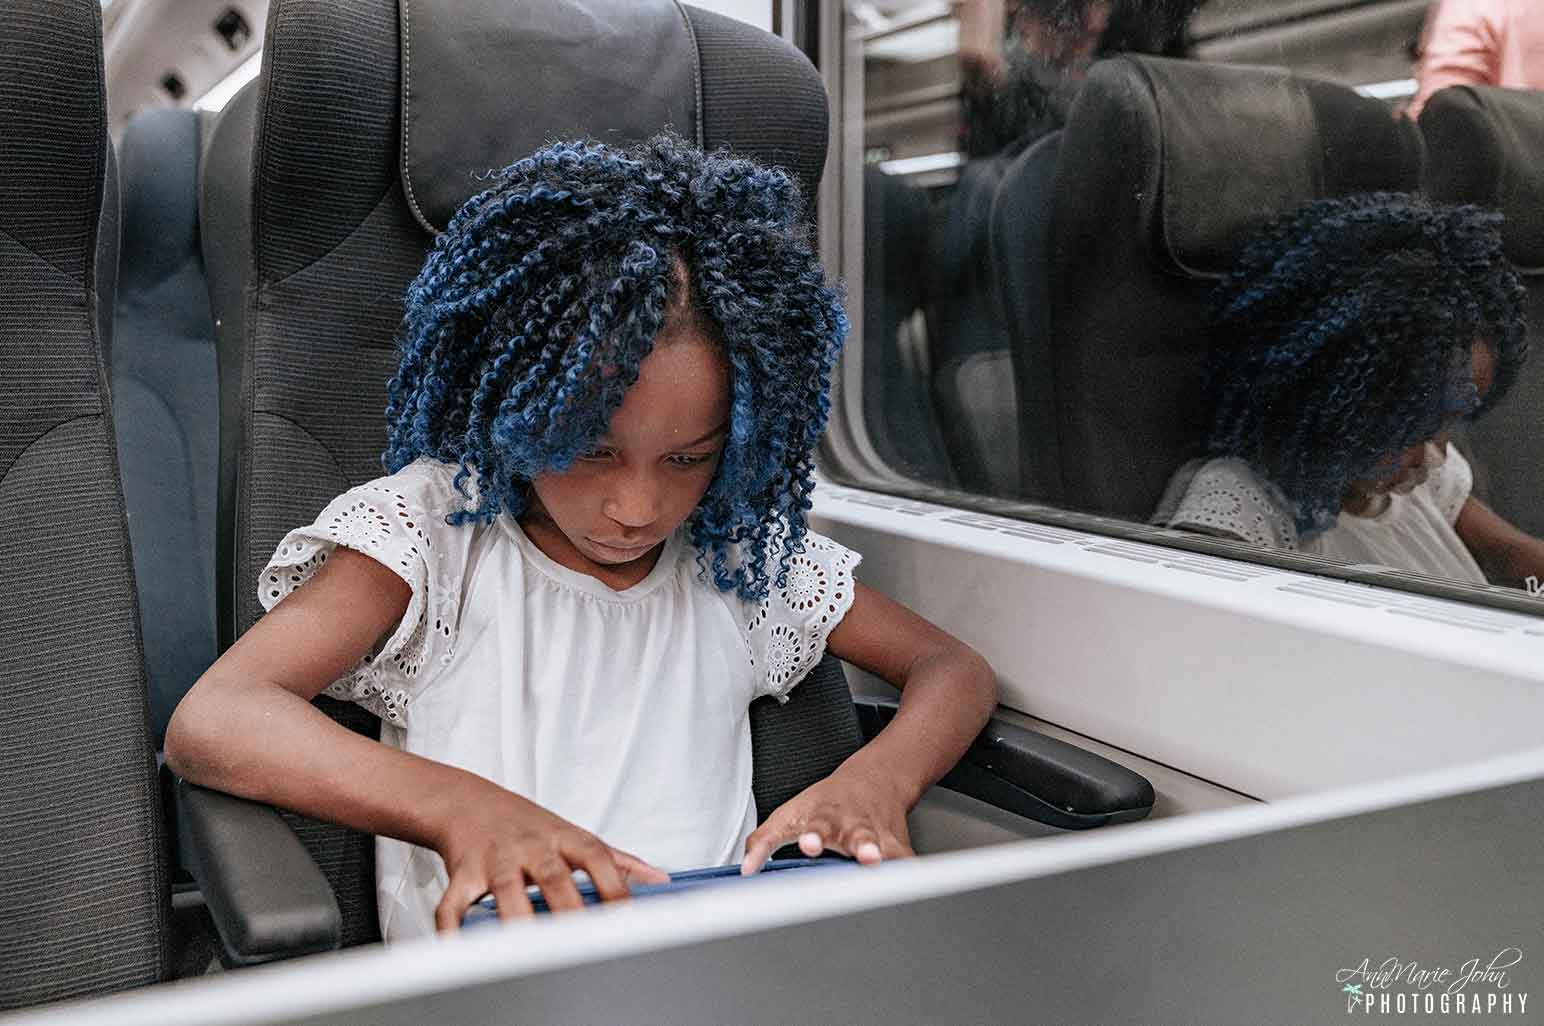 How to Keep Your Children Entertained When Traveling by Rail